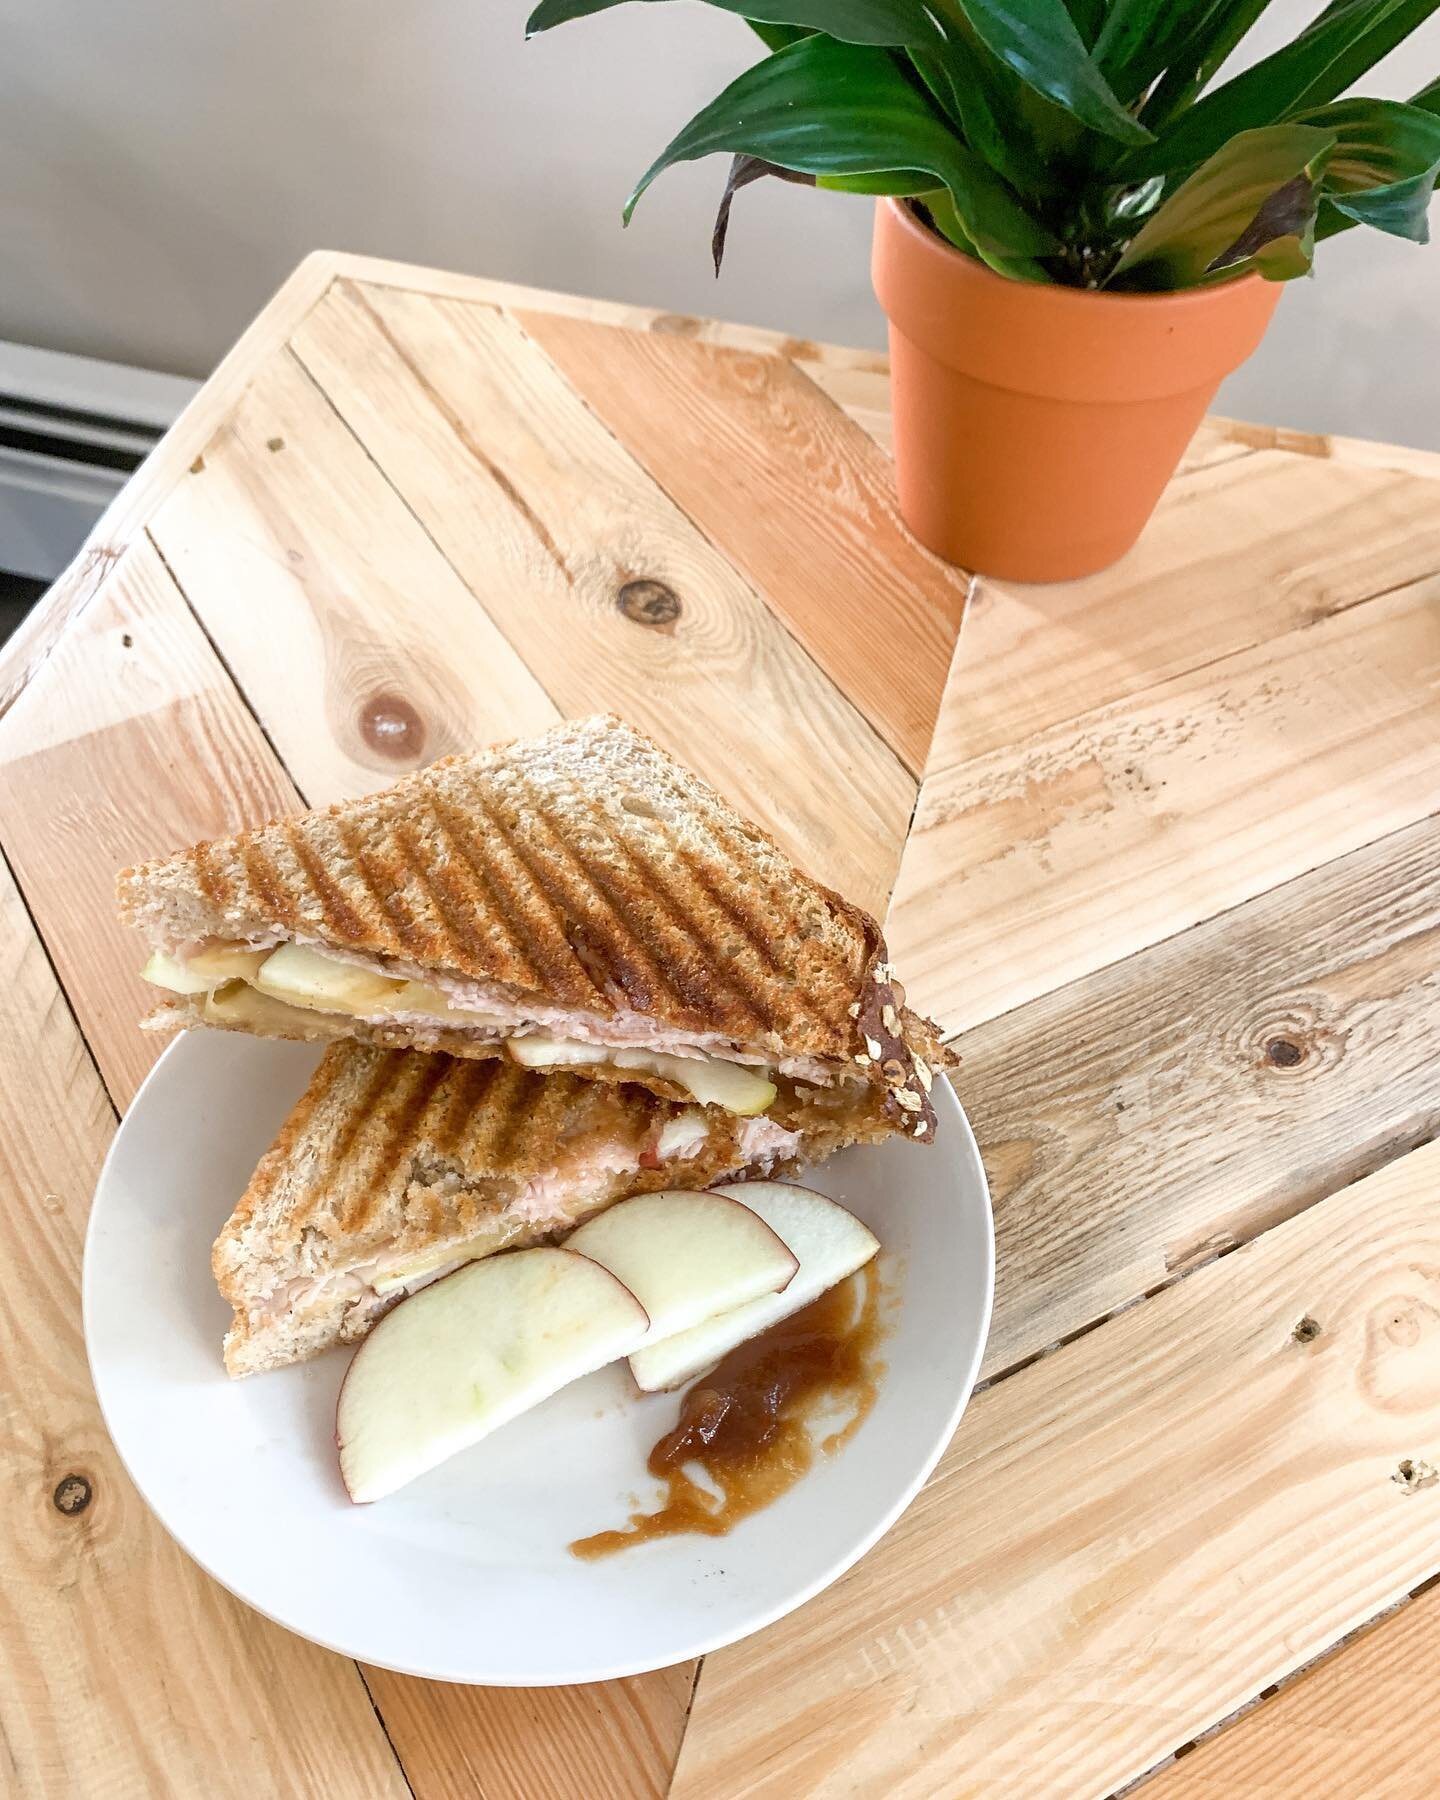 our favorite sandwich special is finally here!! The Turkey Apple Cheddar Panini is a MUST try!

Homemade apple butter spread, turkey, apple slices, and cheddar cheese towered high and grilled on honey oat bread 🍎